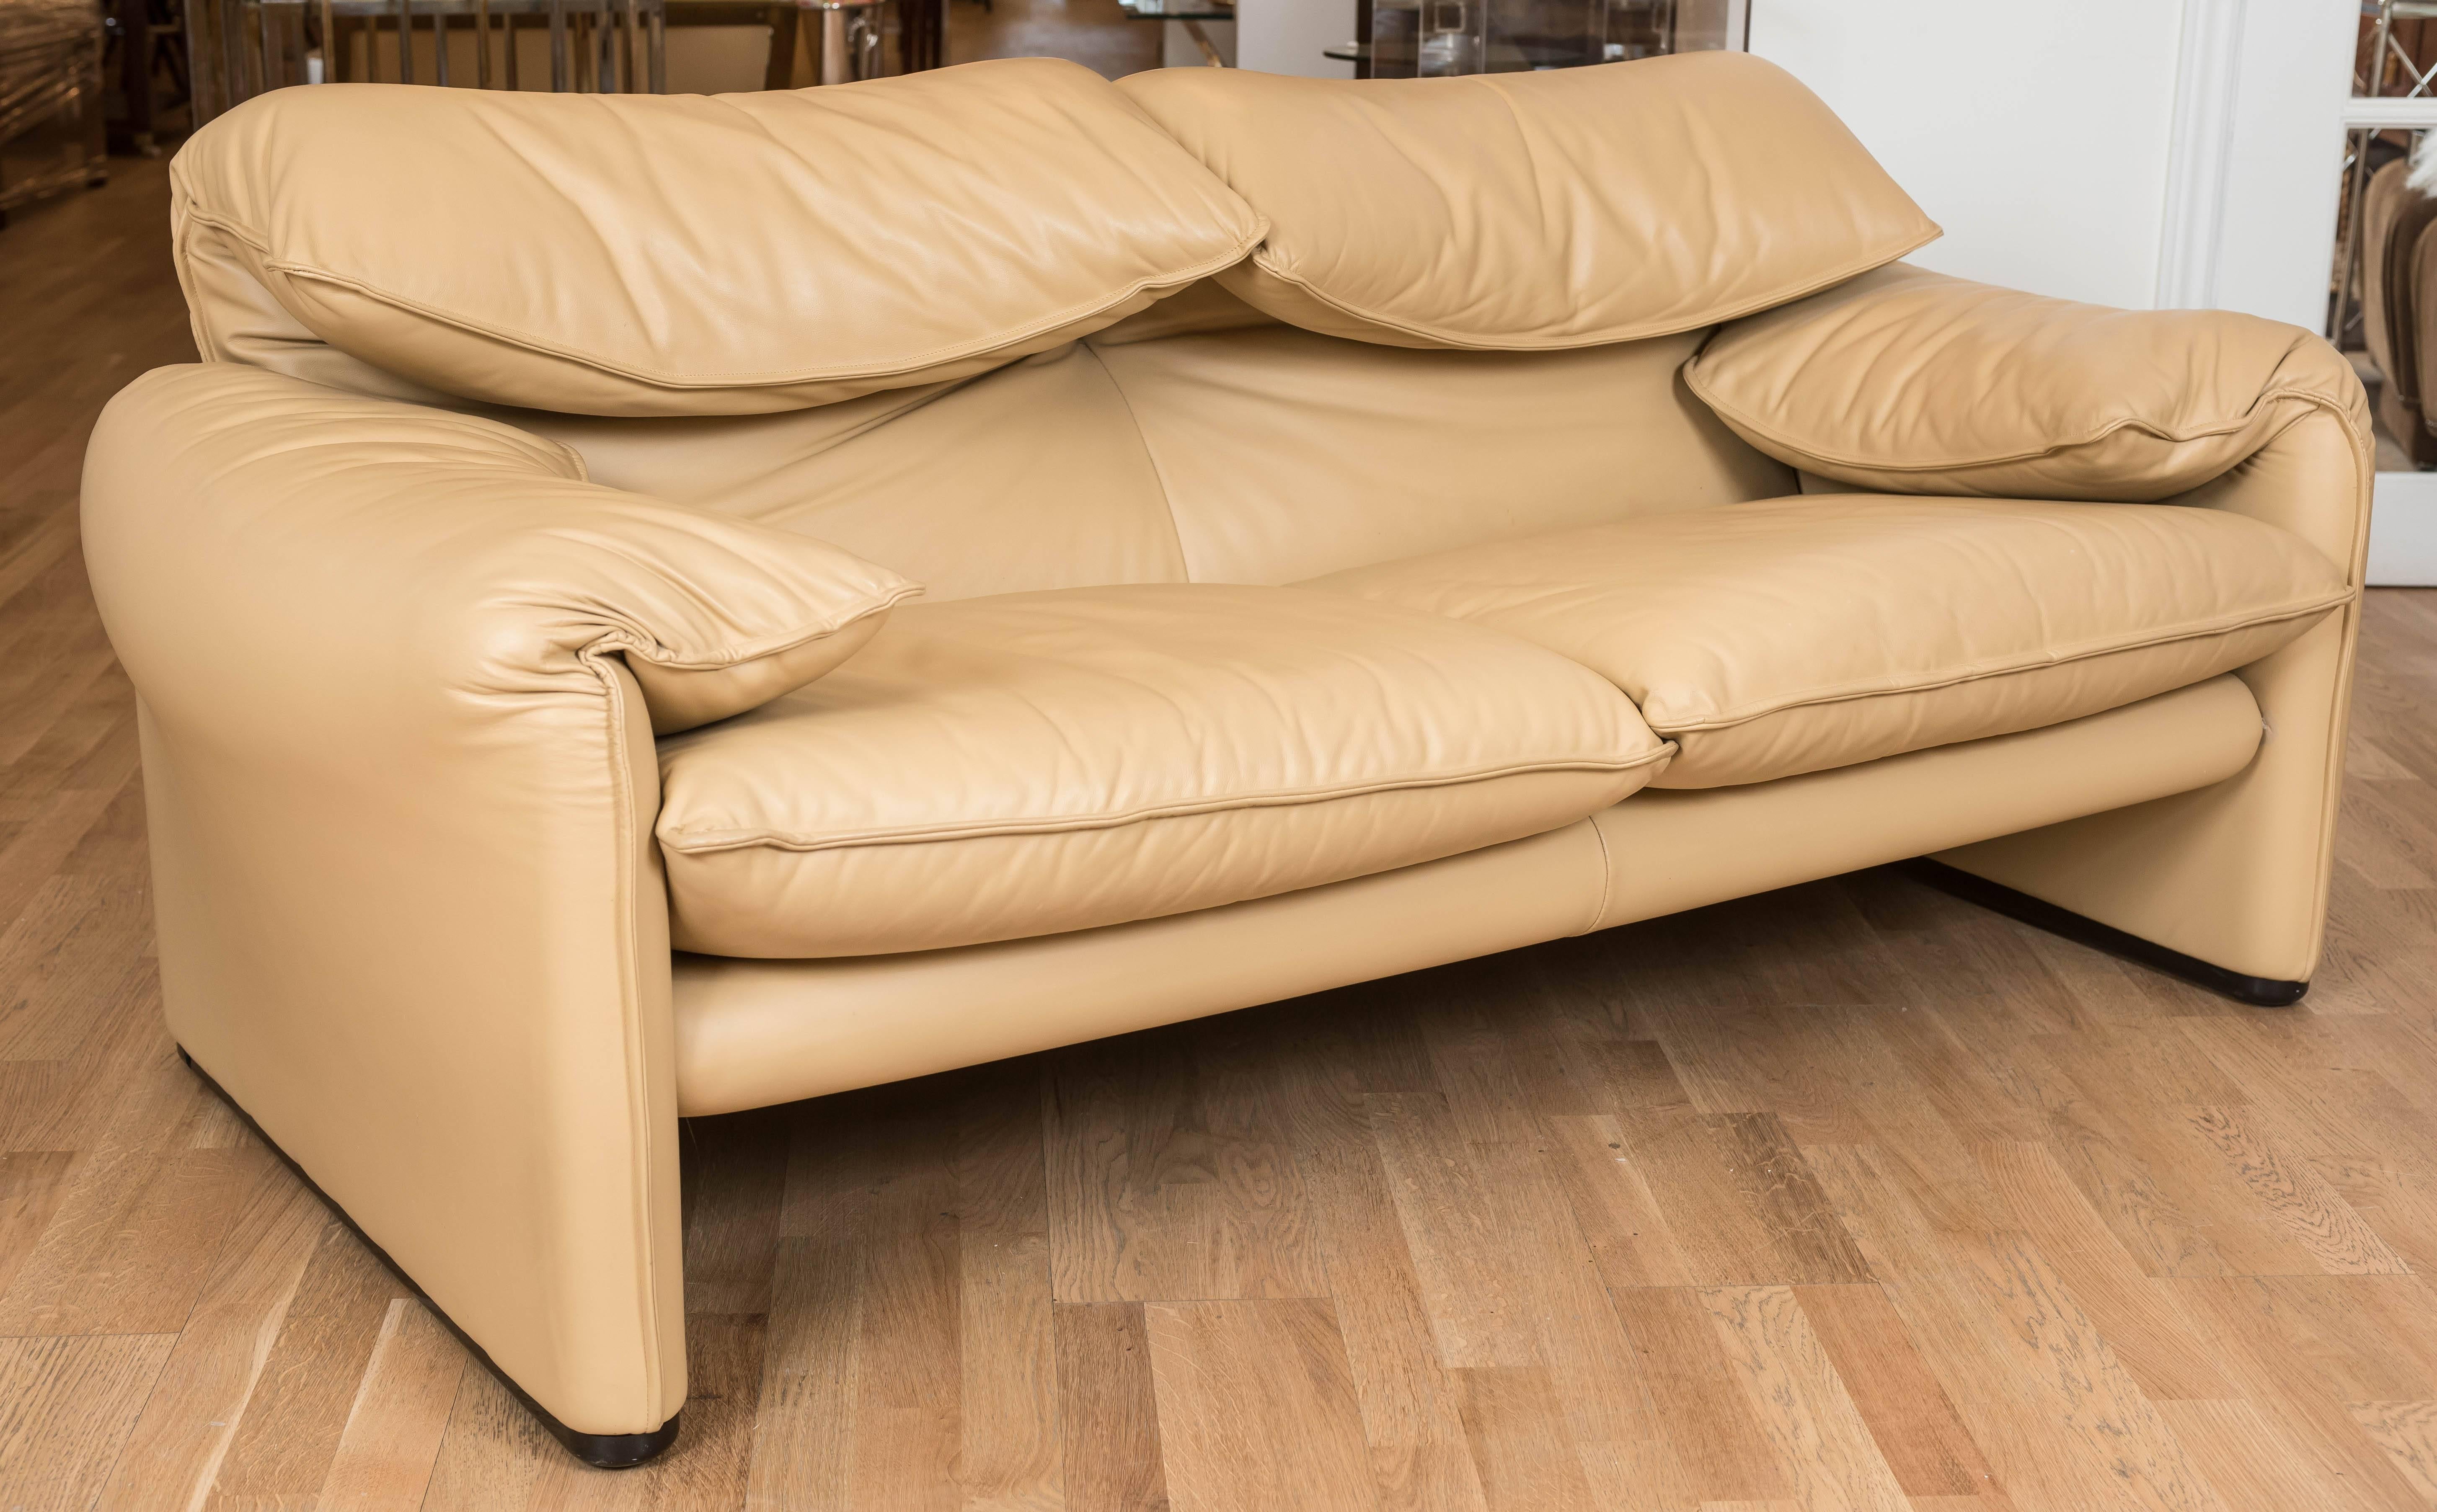 Hand-Crafted Maralunga Two-Seat Sofa in Leather by Vico Magistretti for Cassina of Italy